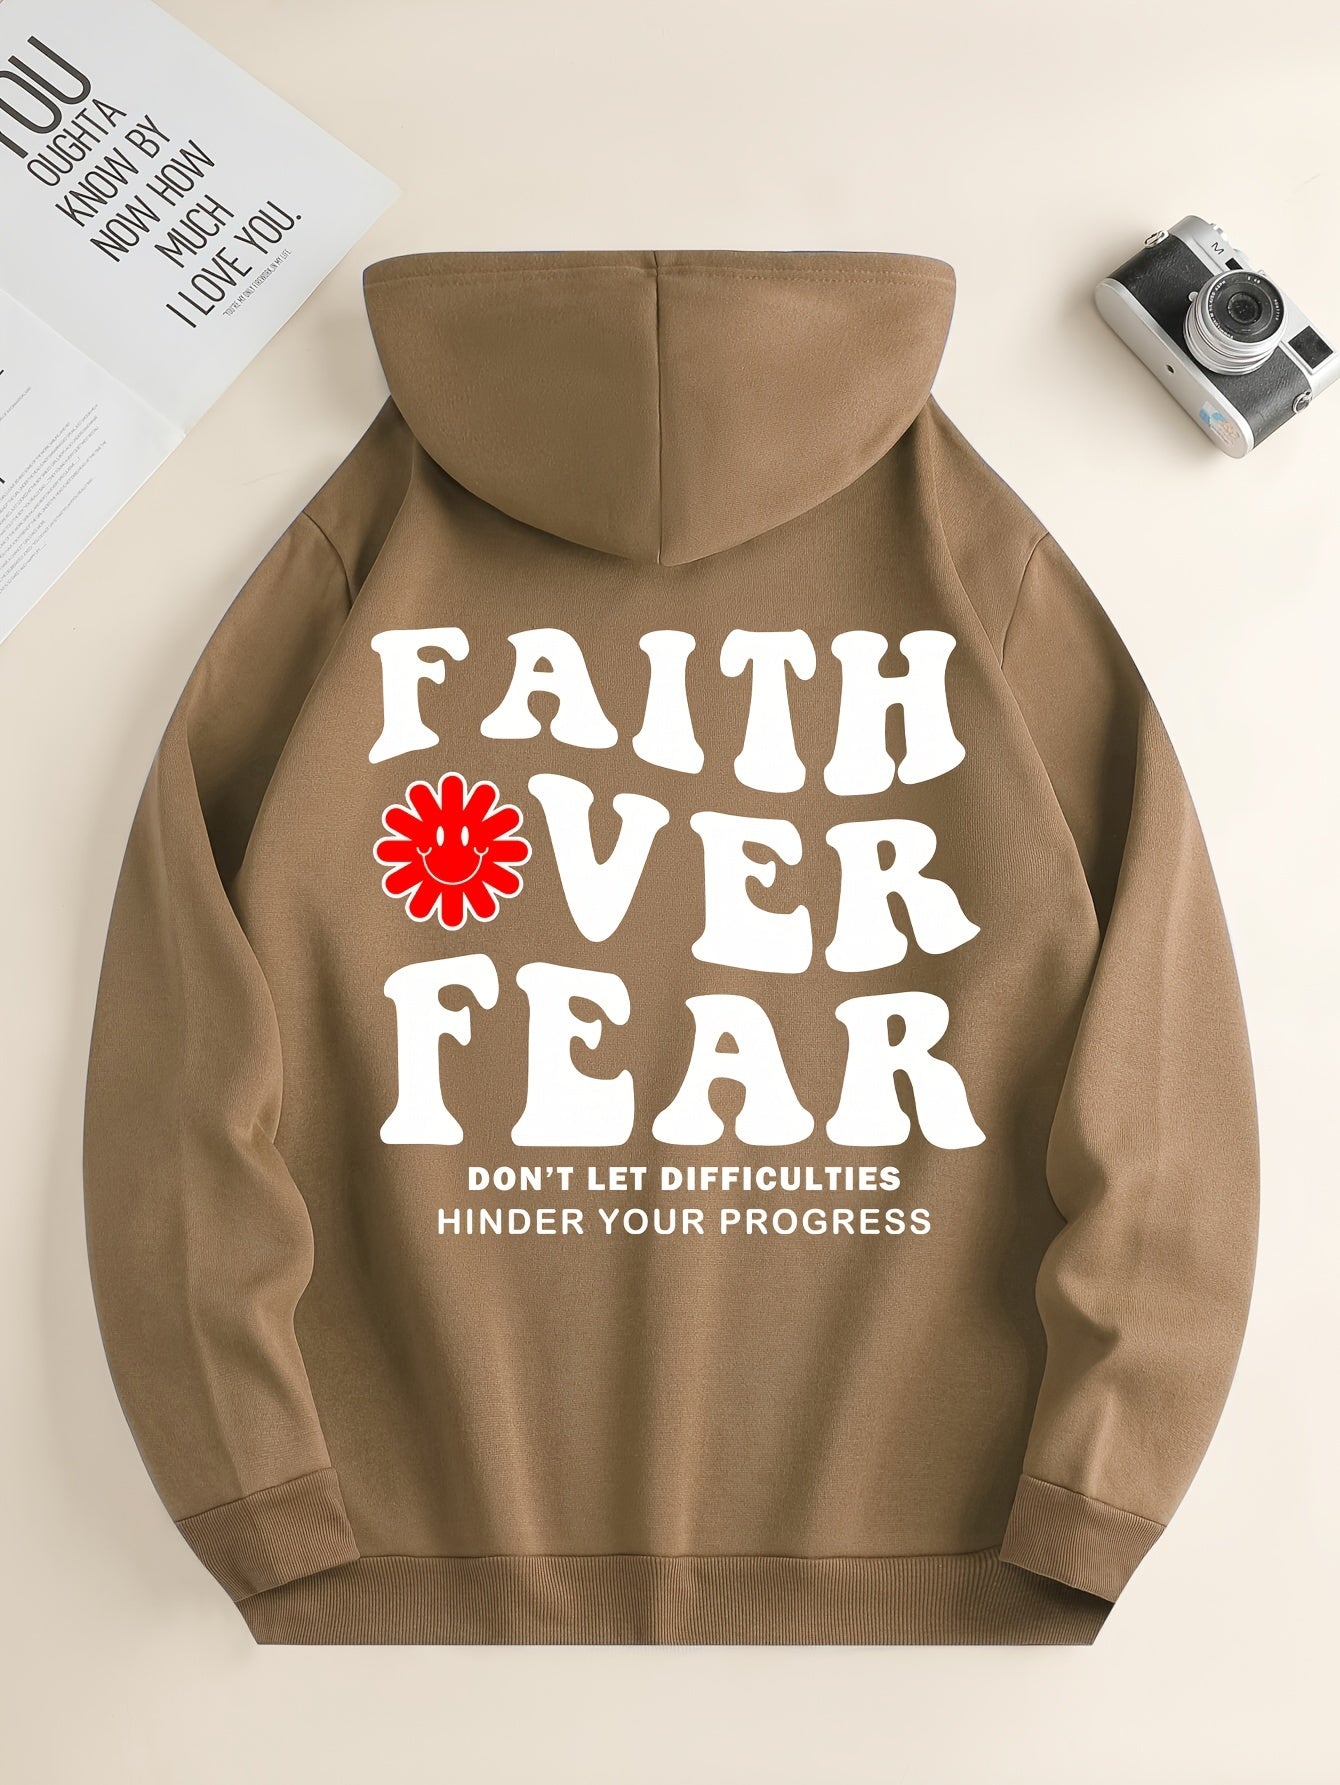 FAITH OVER FEAR: Don't Let Difficulties Hinder Your Progress Unisex Christian Pullover Hooded Sweatshirt claimedbygoddesigns